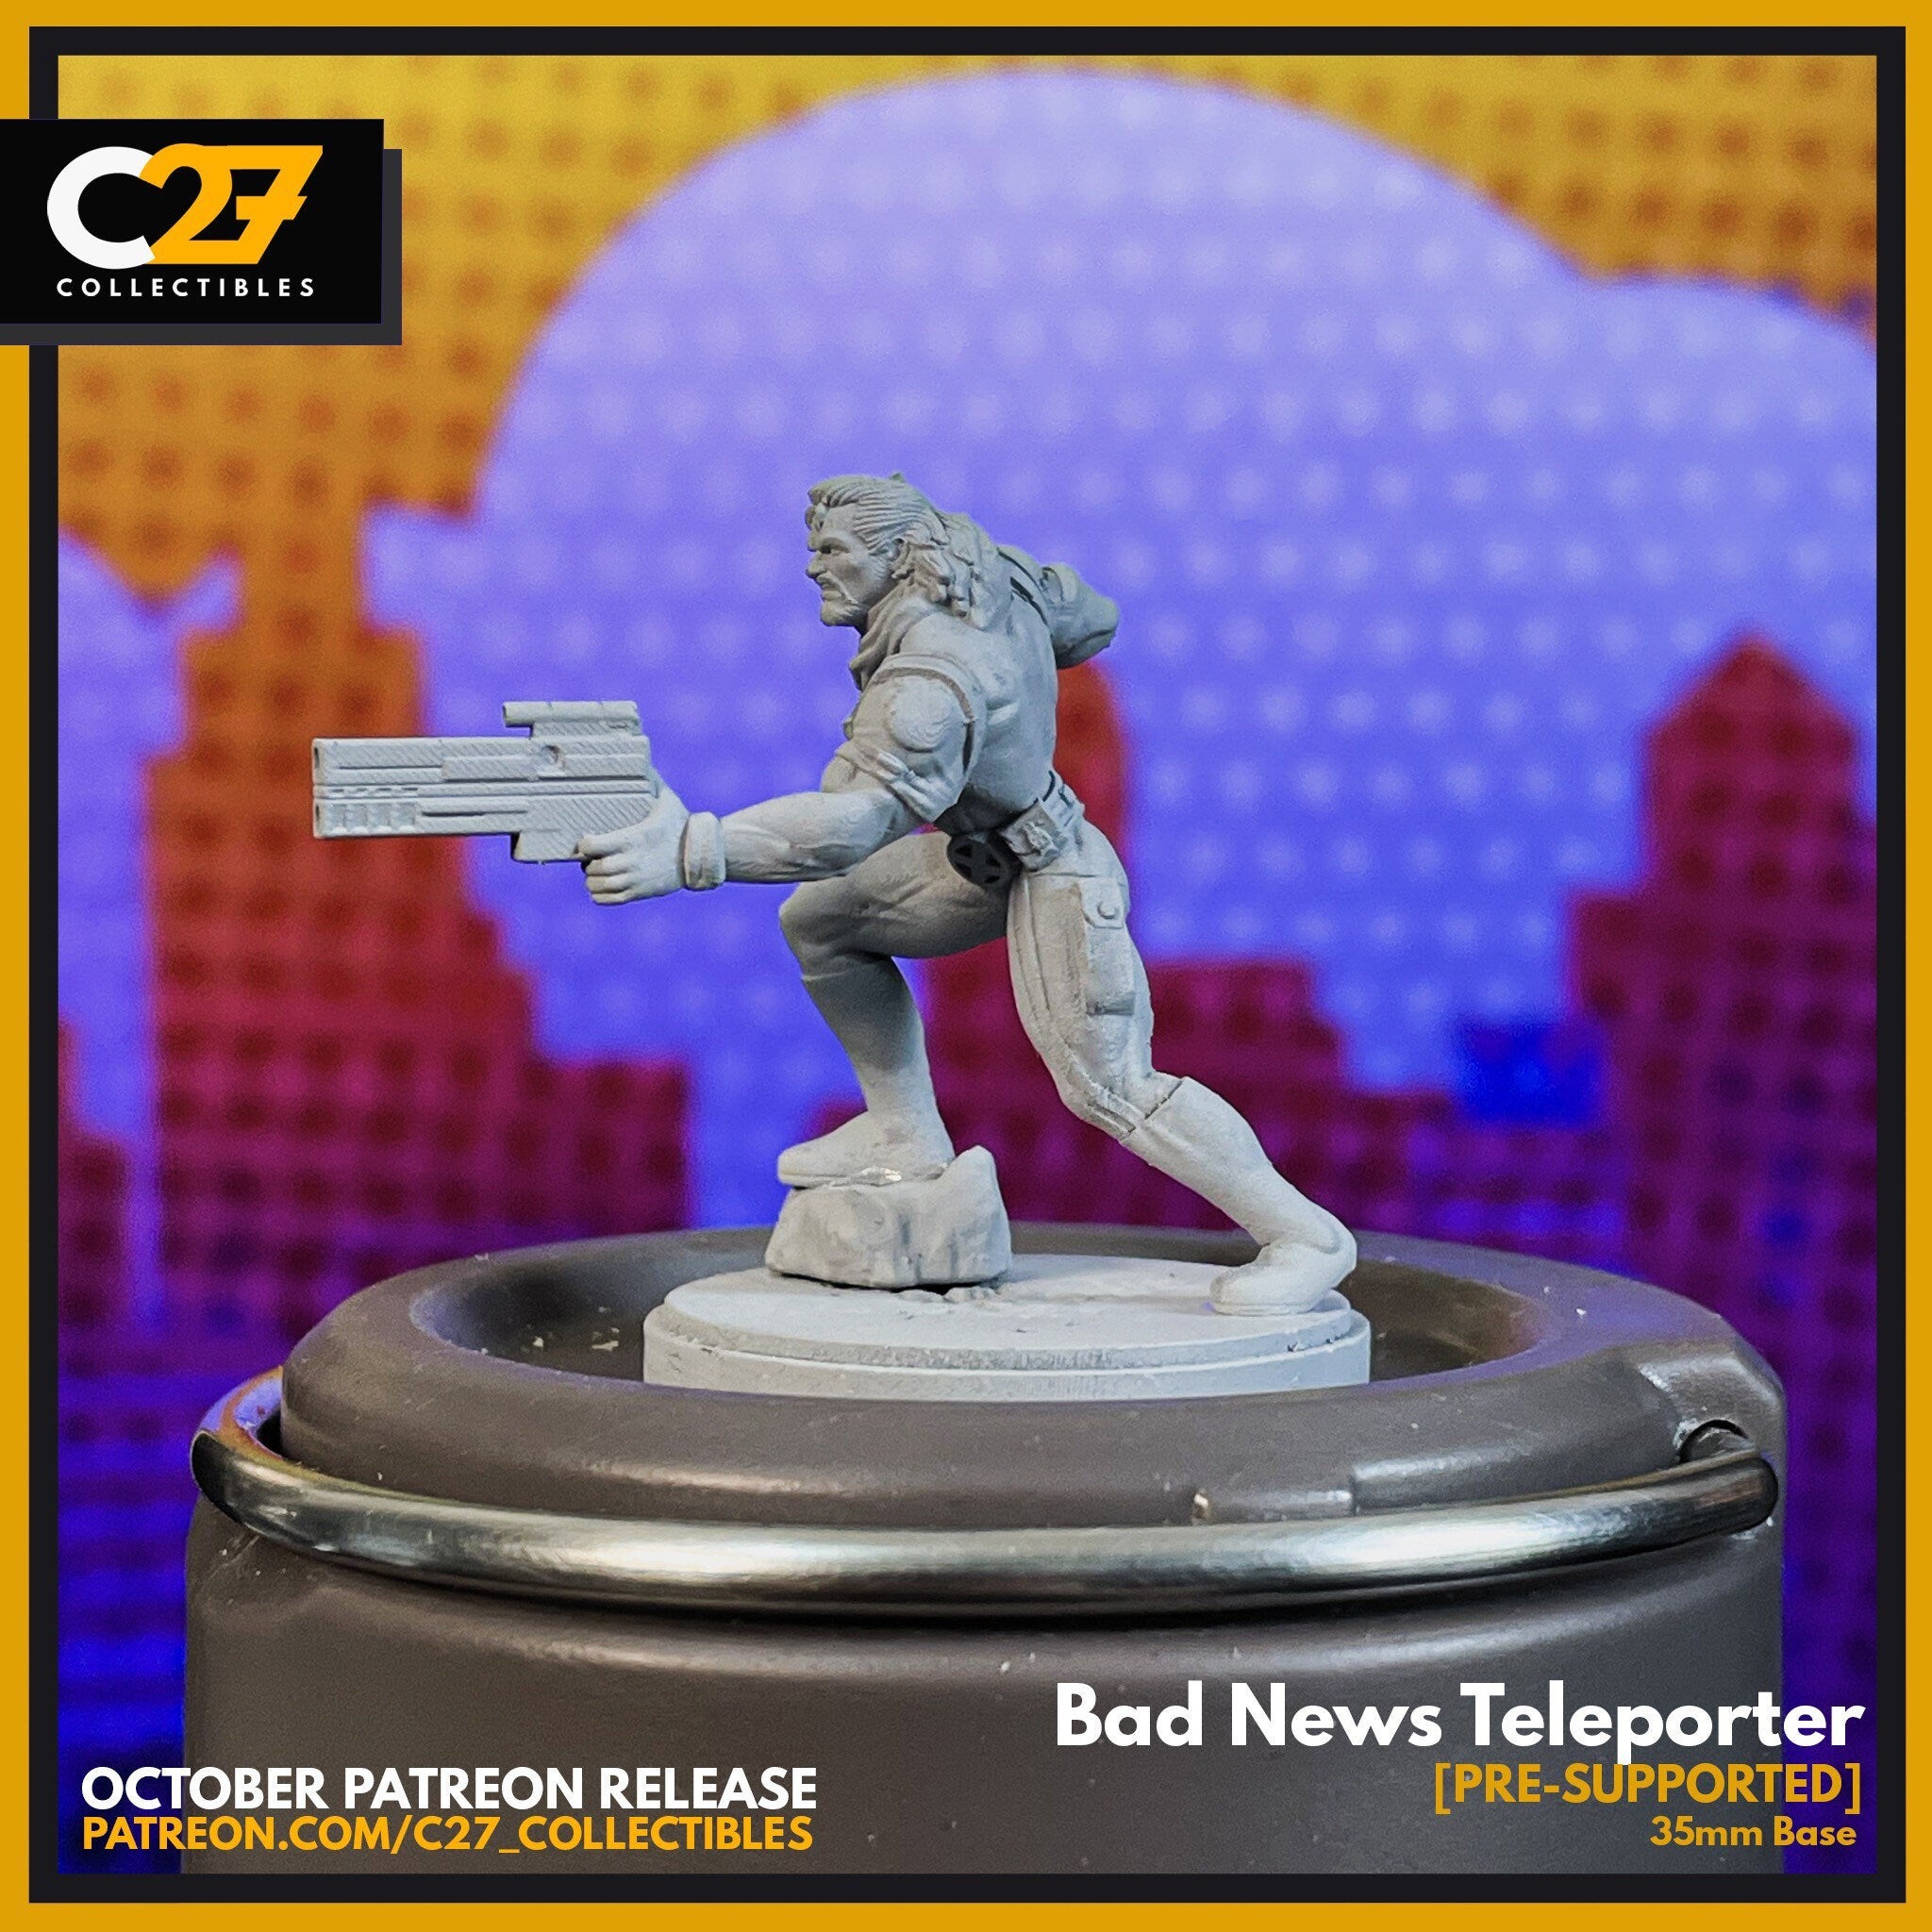 Bishop / Bad News Teleporter 40mm miniature (sculpted by C27 collectibles)  (Crisis Protocol Proxy/Alternative)